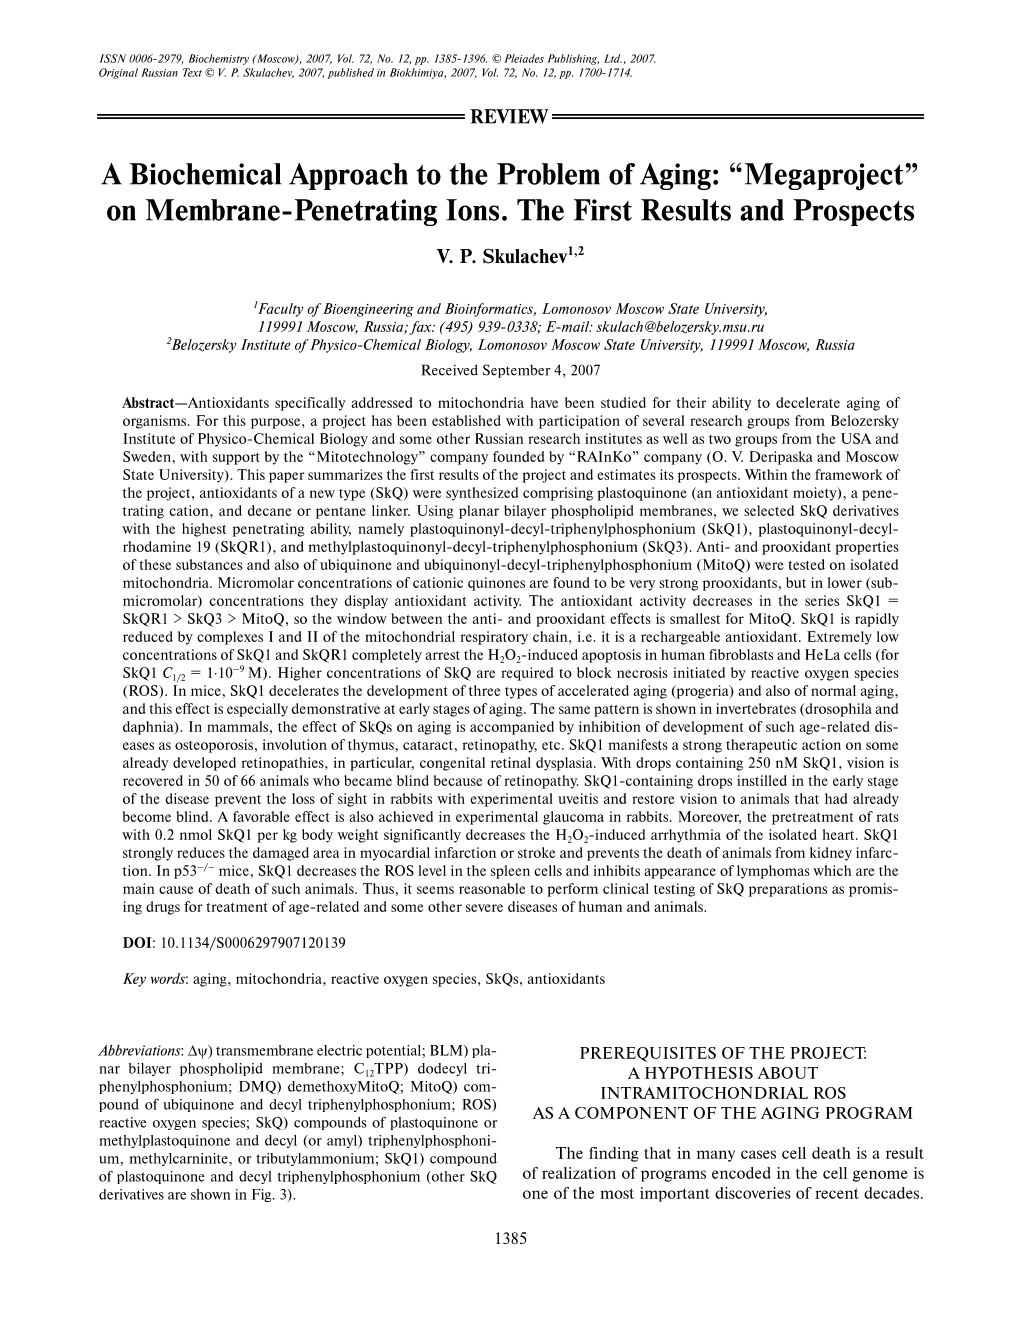 A Biochemical Approach to the Problem of Aging: “Megaproject” on Membrane-Penetrating Ions